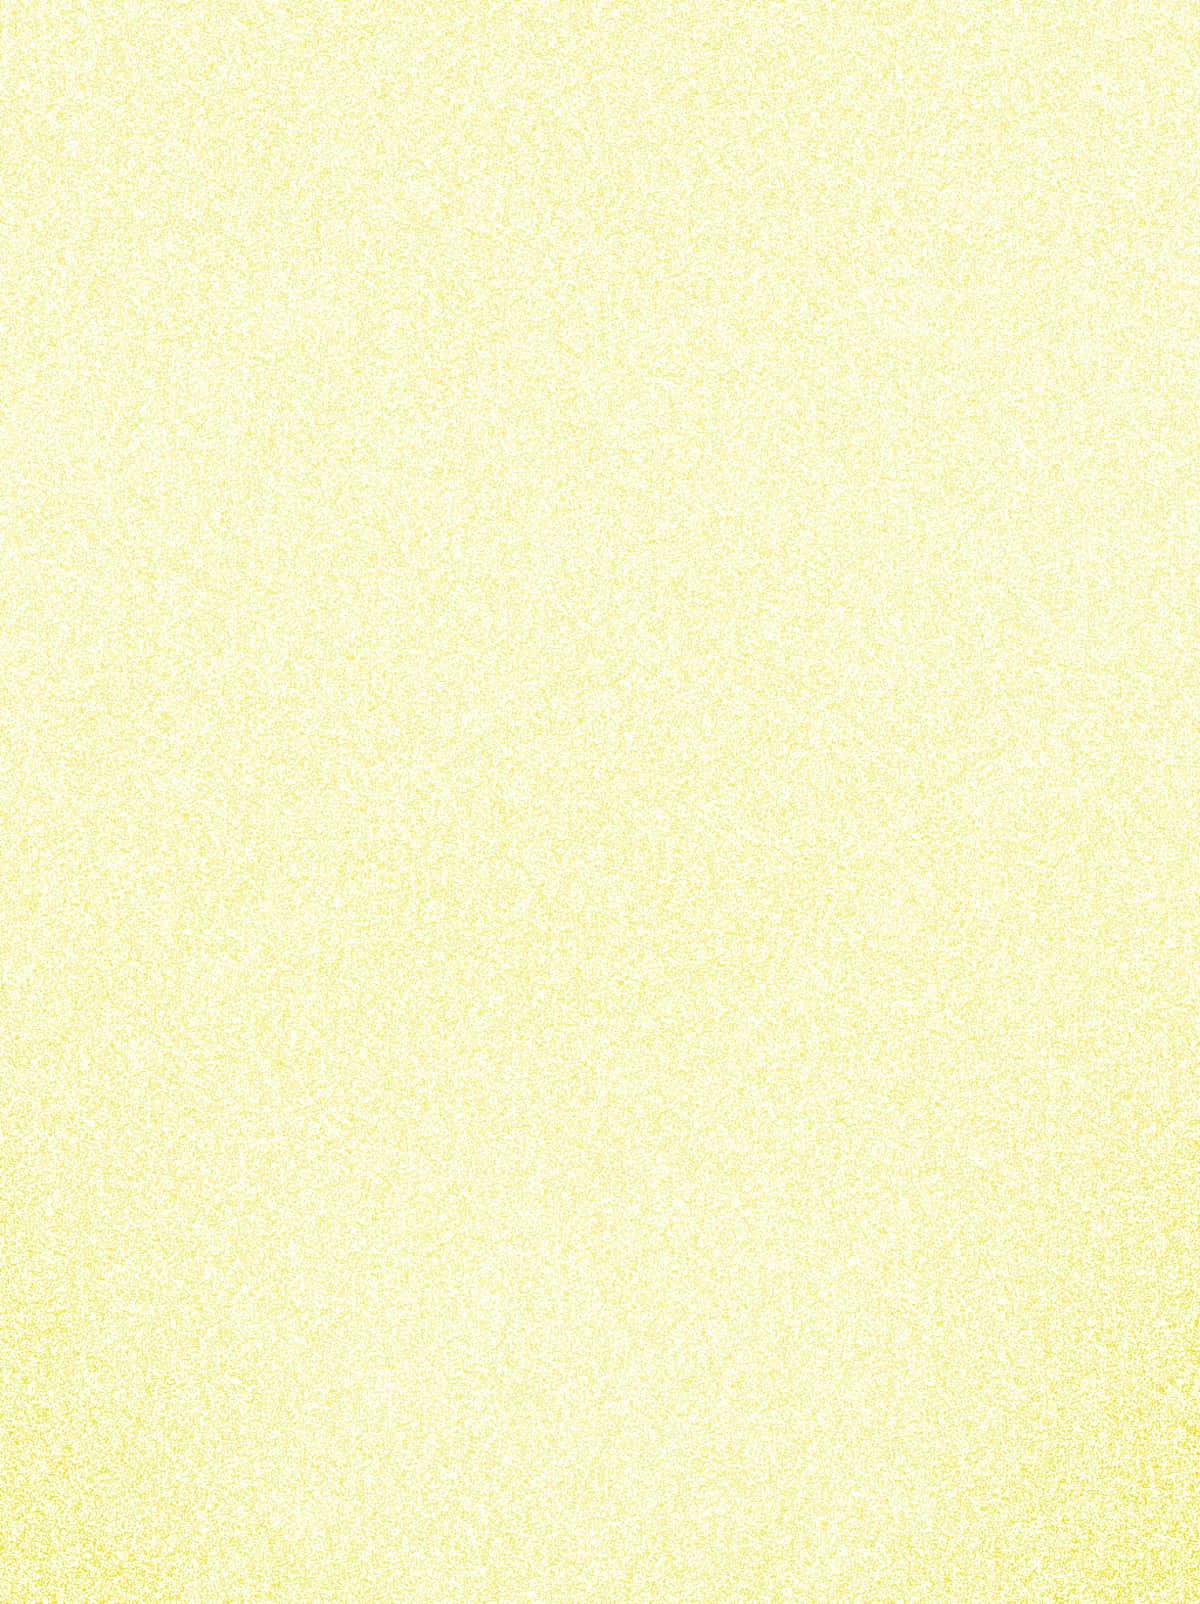 A Bright and Bold Solid Yellow Background Wallpaper